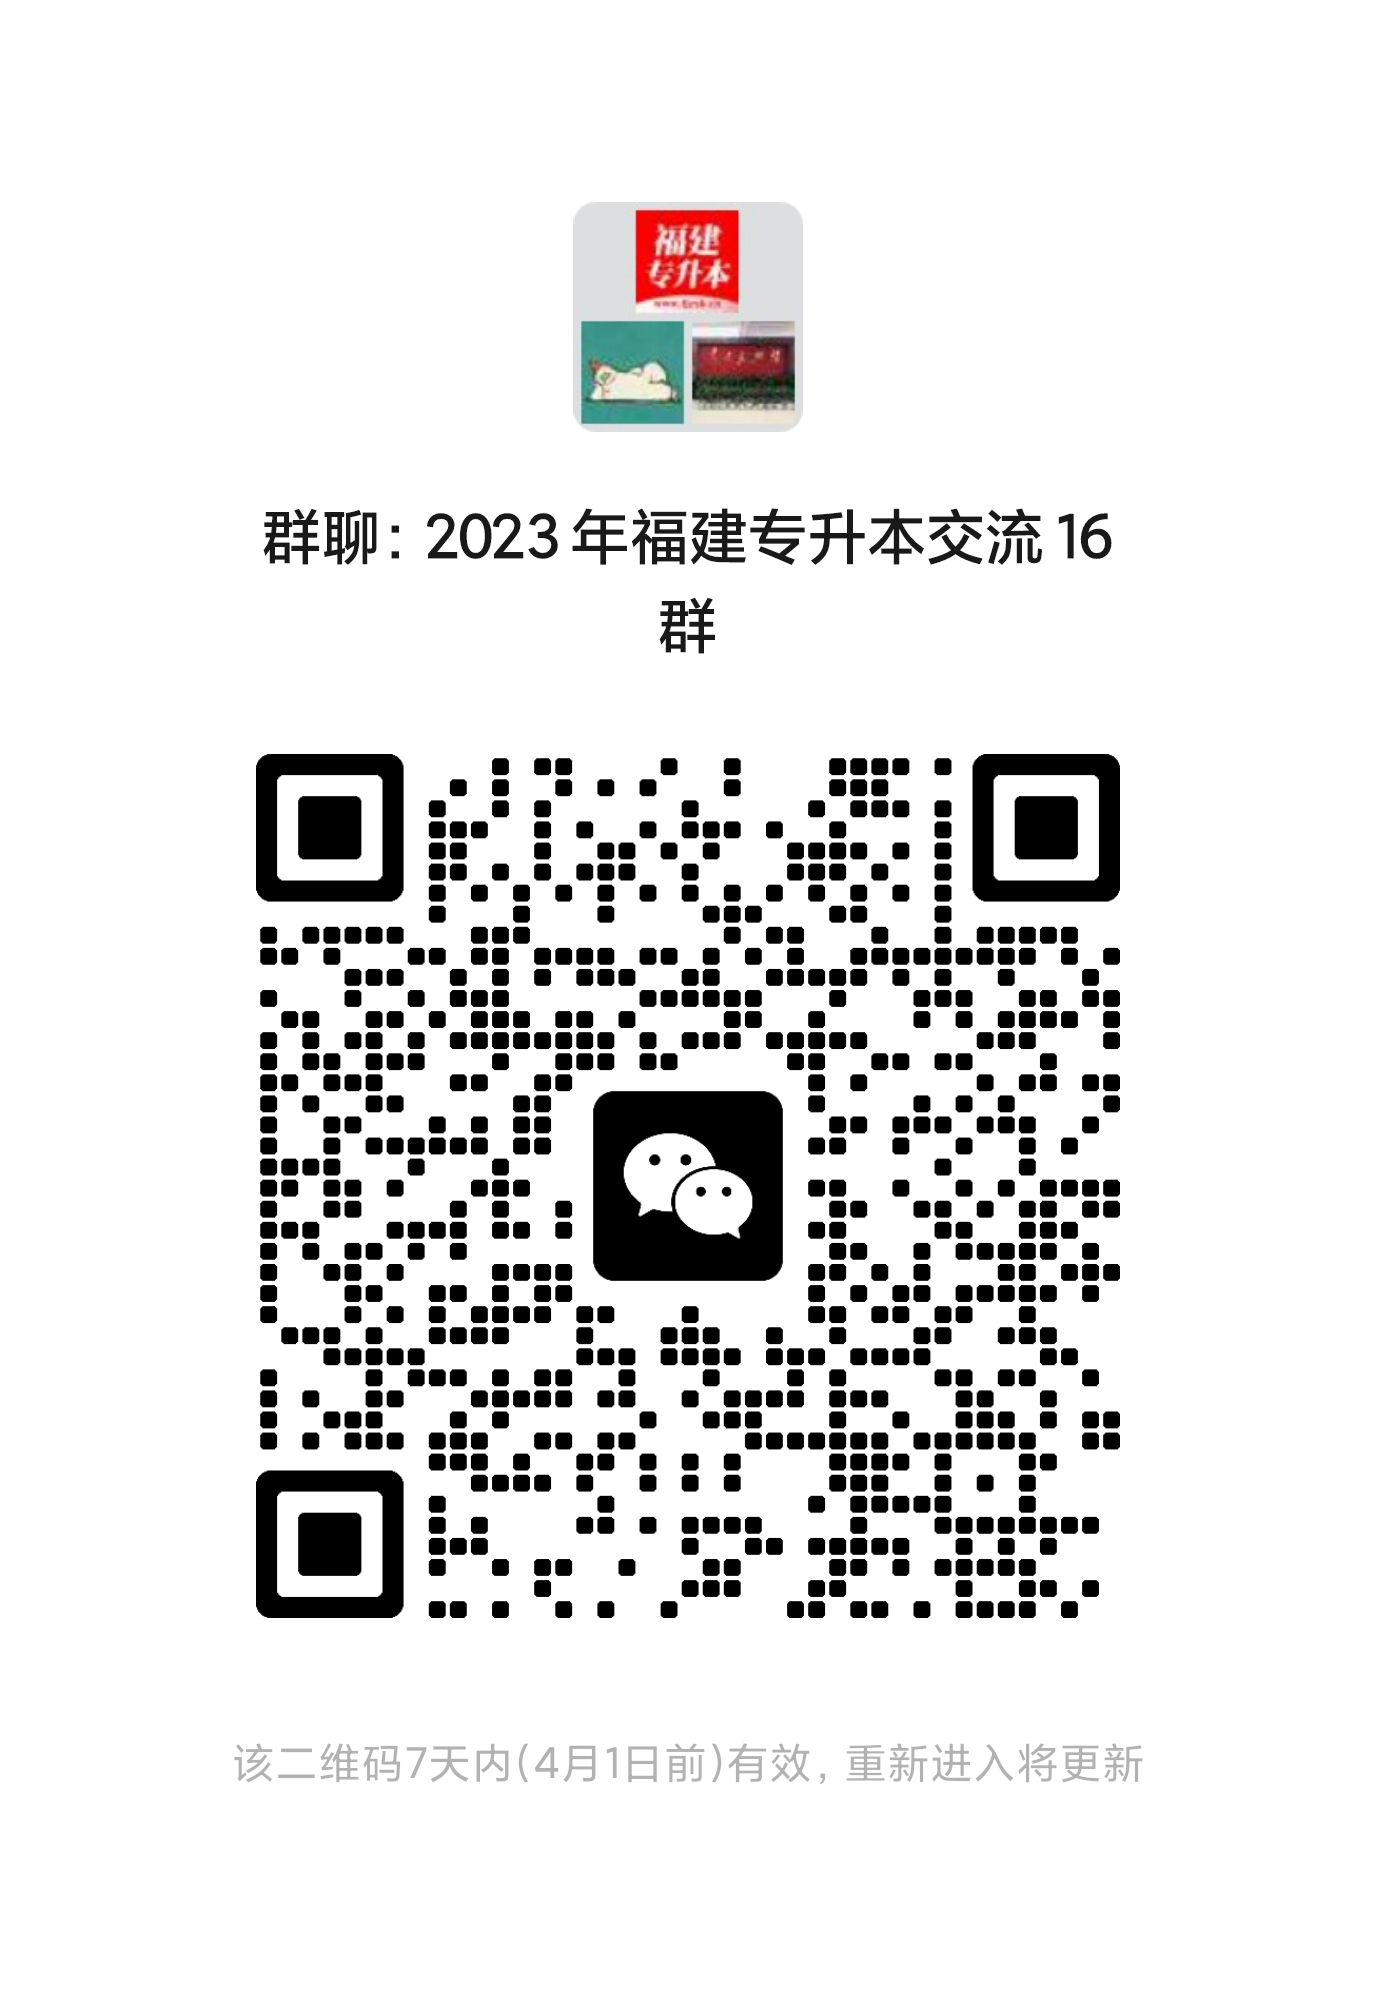 mmqrcode1679747920022.png